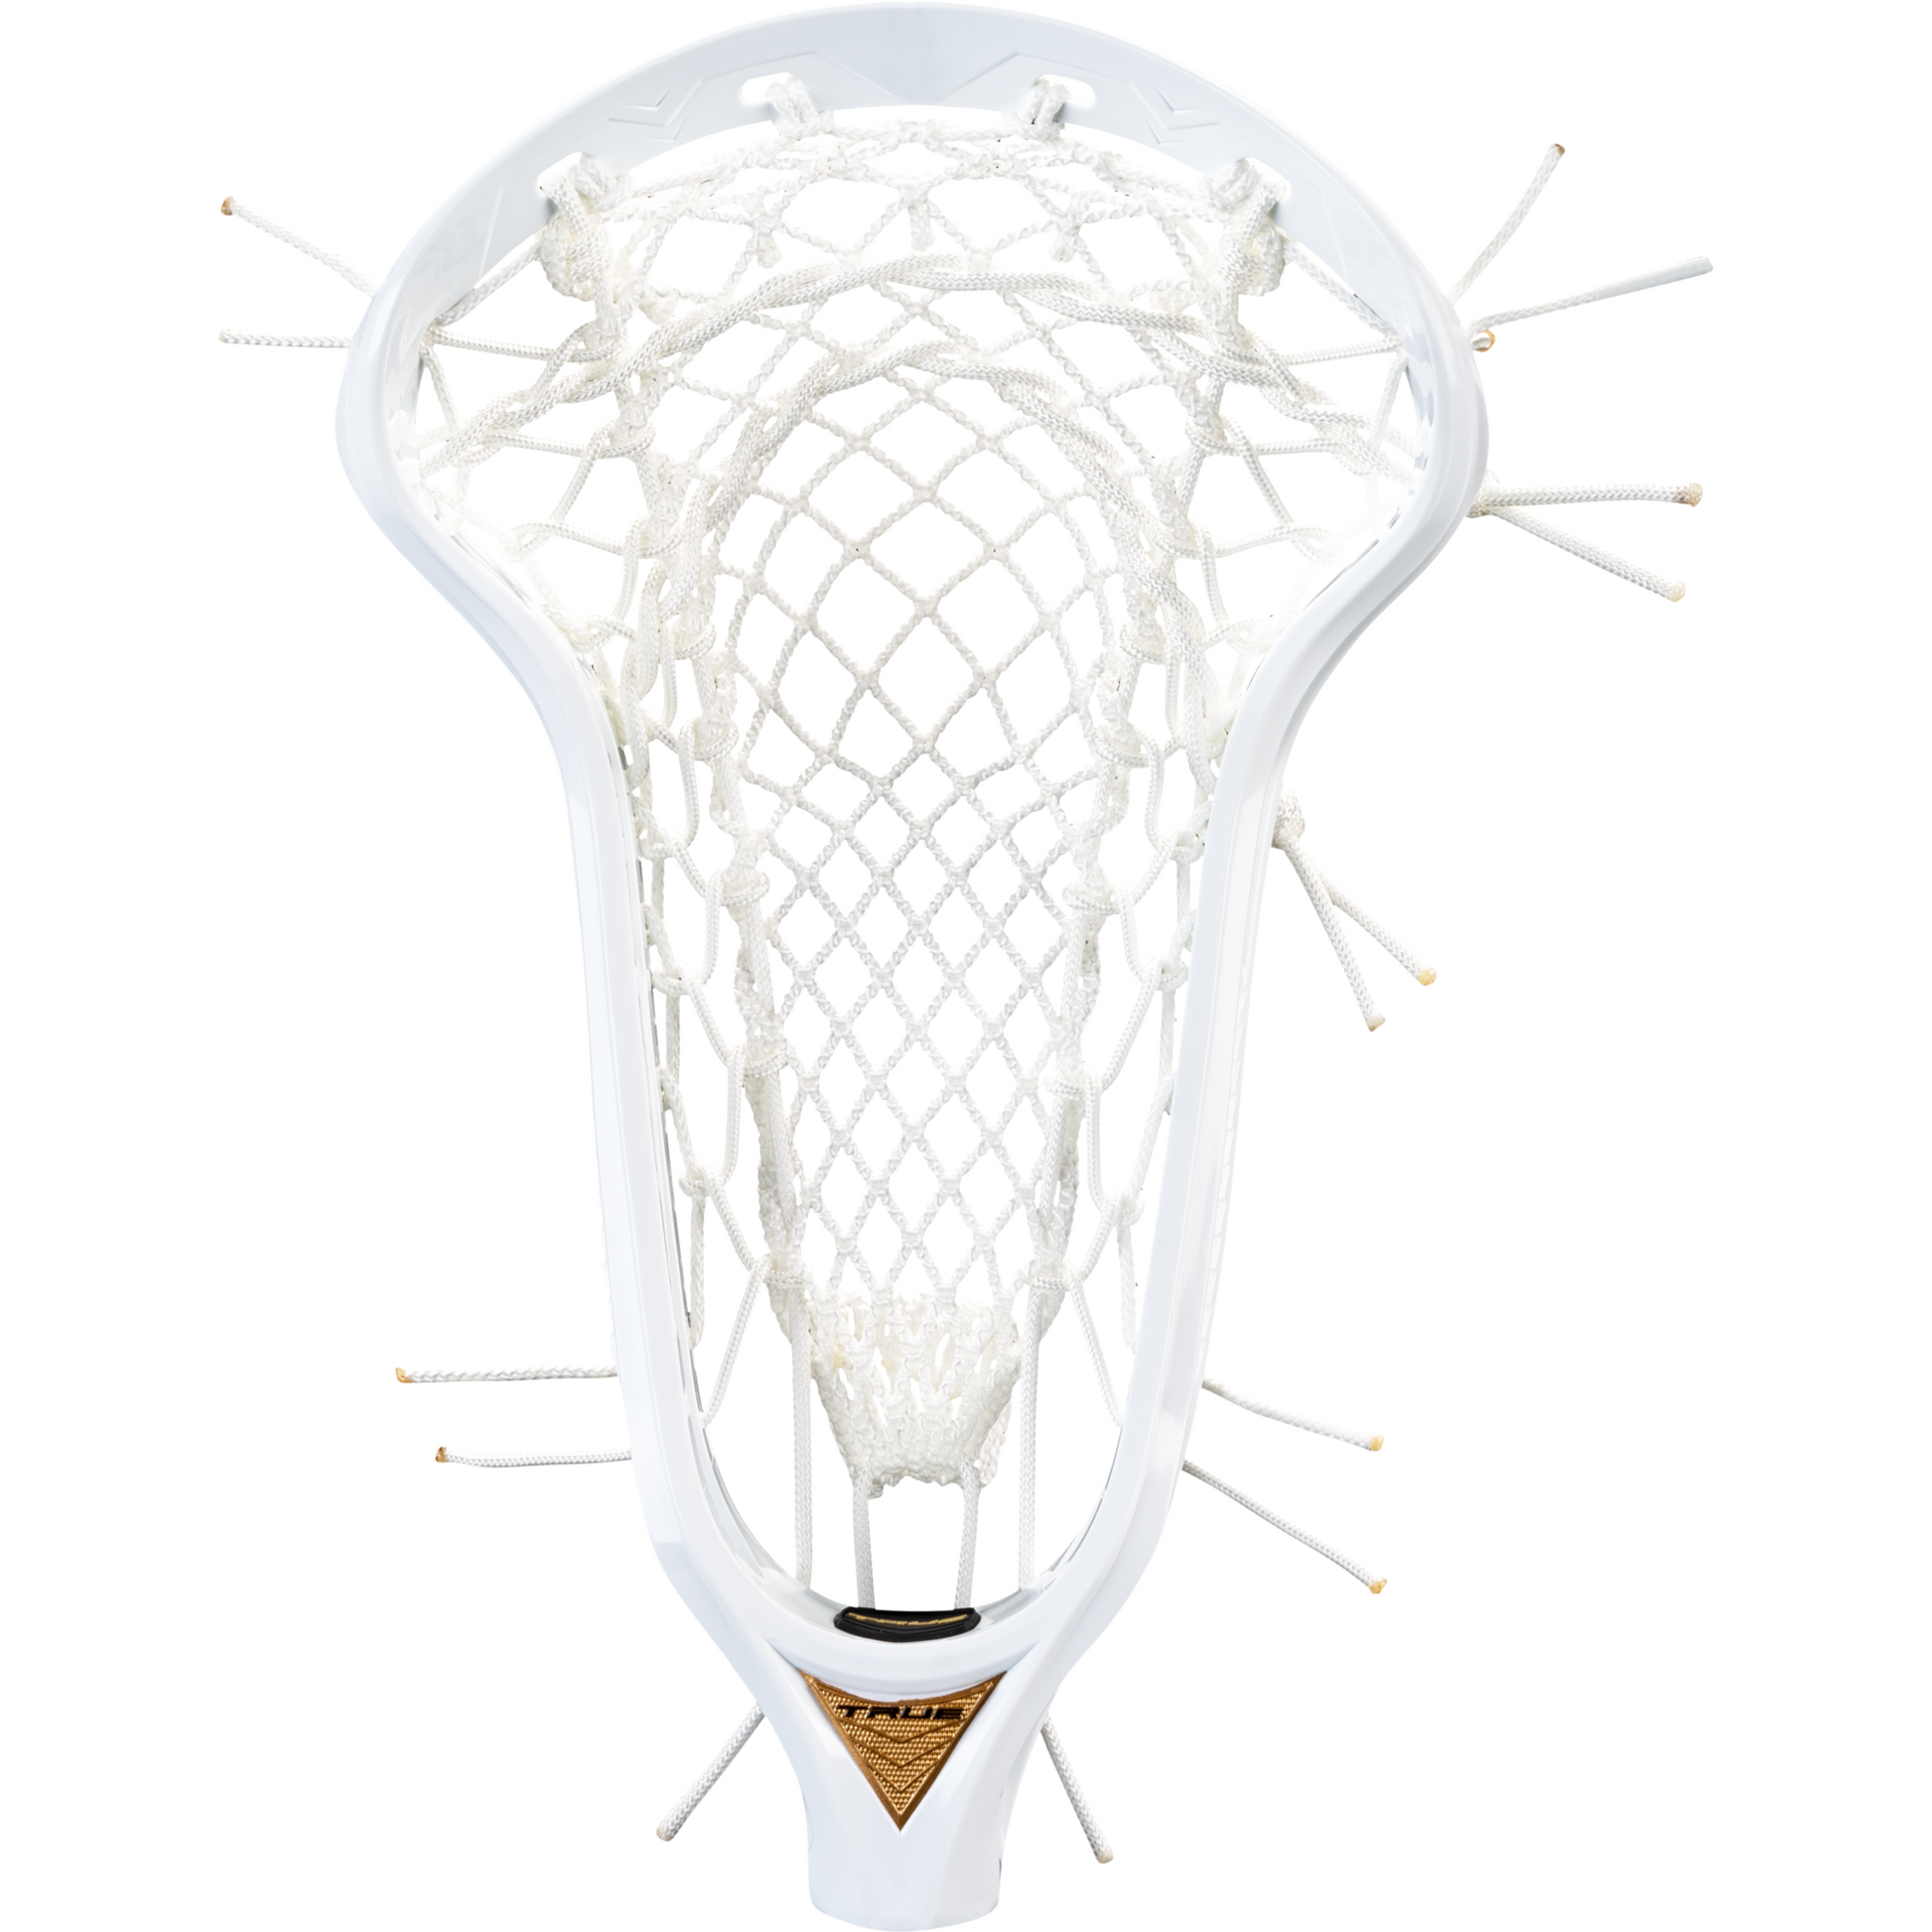 LYNX Ignition Runner Strung Women's Lacrosse Head, white head with white pocket